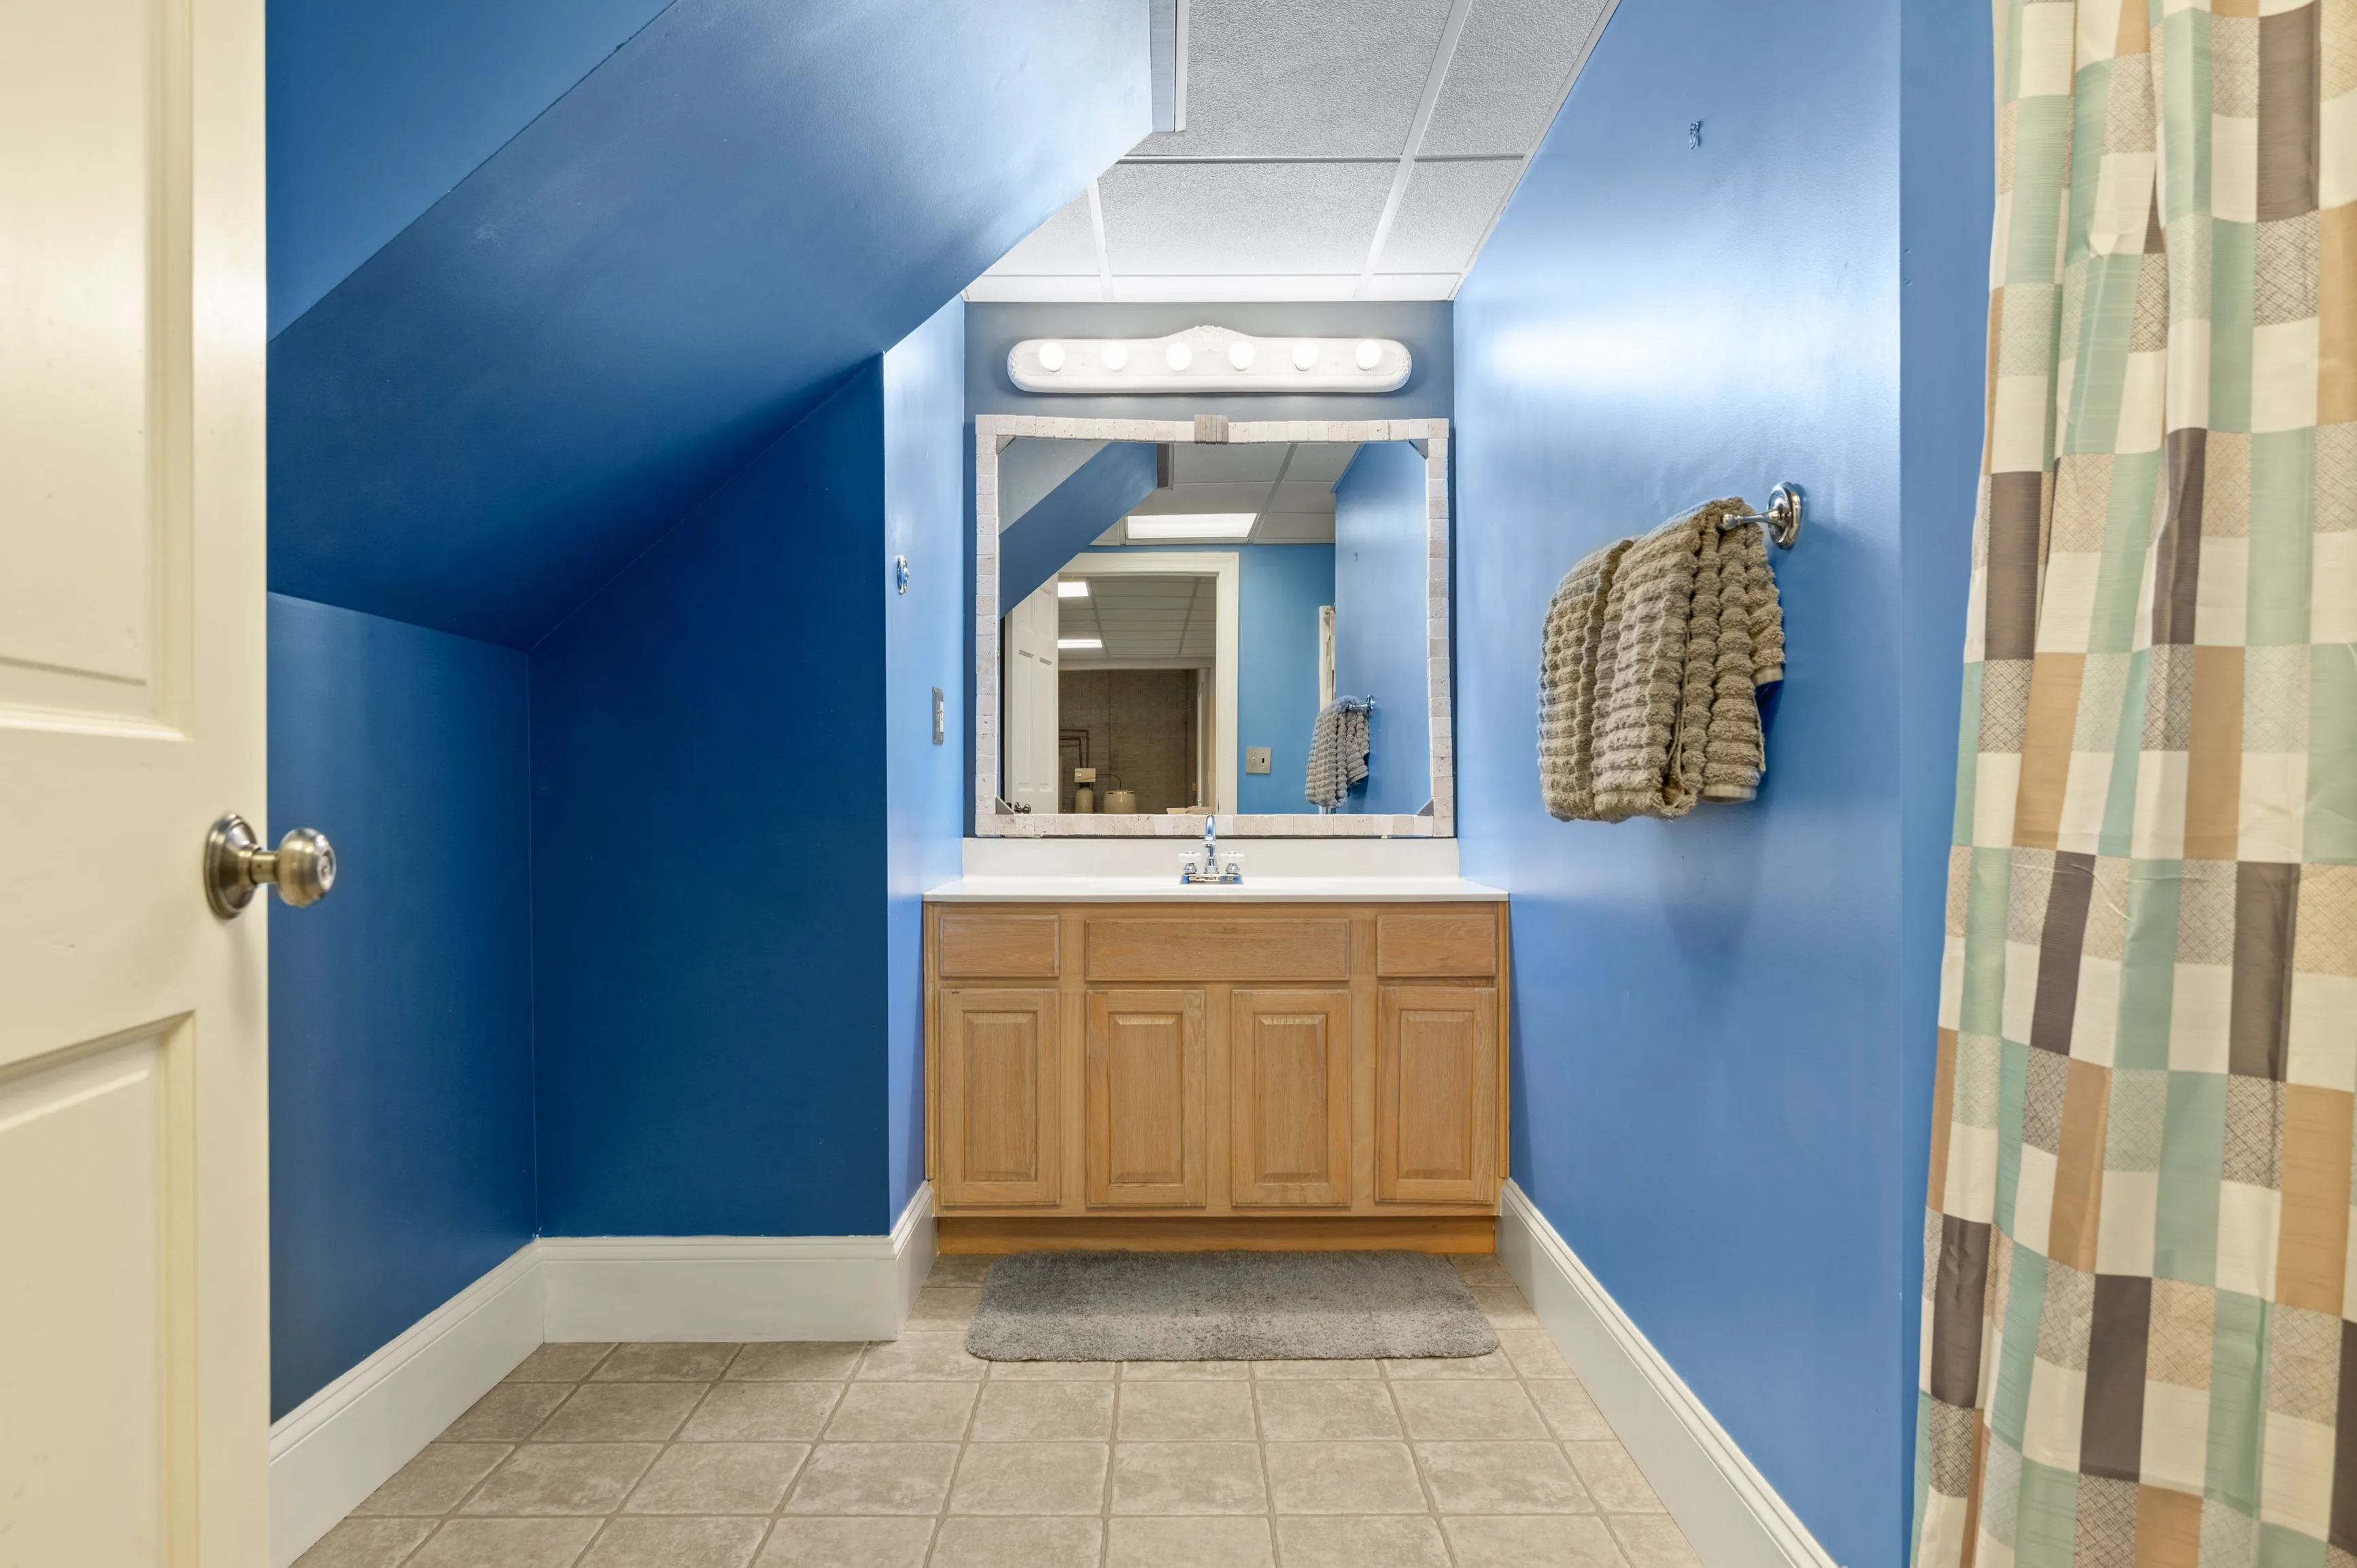 A bright blue bathroom featuring a wooden vanity with a large mirror, tiled flooring, and a plaid shower curtain.